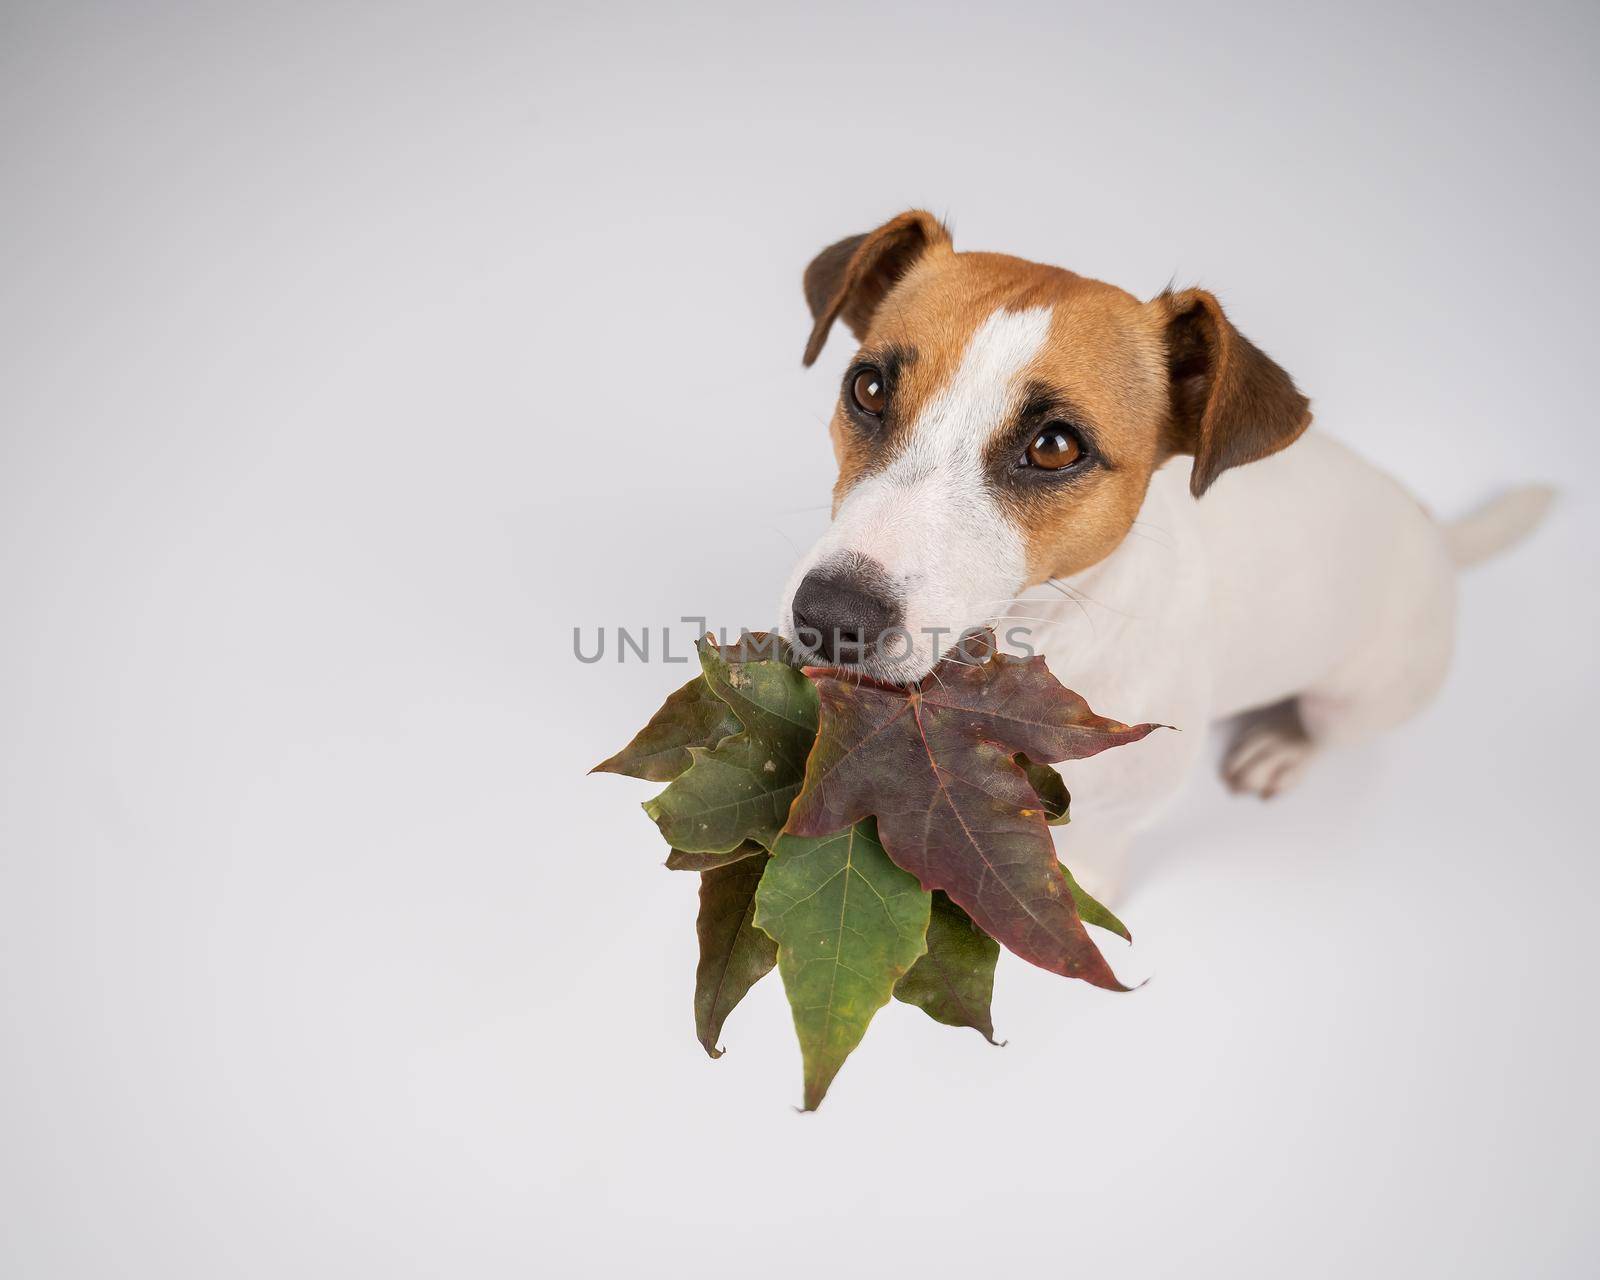 Jack russell terrier dog holding fallen maple leaves on a white background in the studio